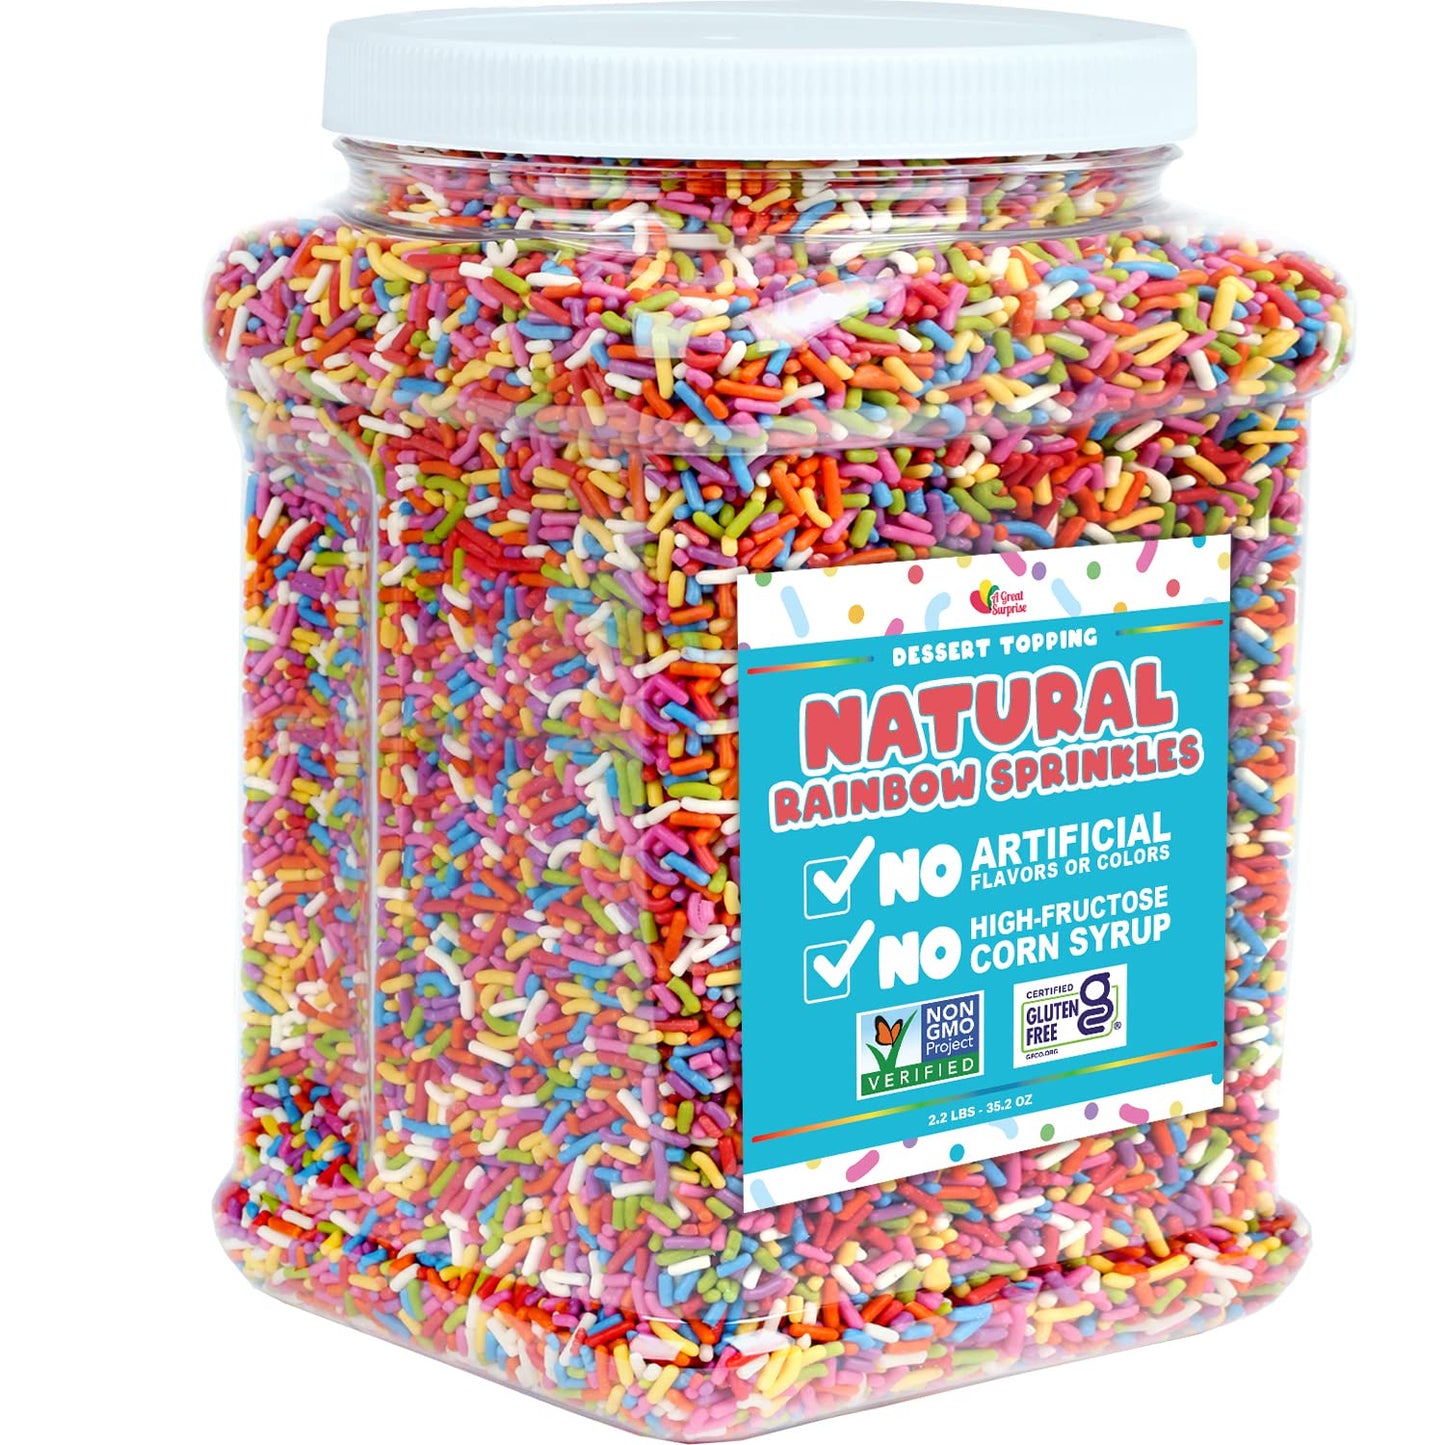 Sprinkles Rainbow - 2.2 LB Container - 100% All NATURAL - Rainbow Sprinkles with No Artificial Colors - Carnival Sprinkles in Resealable Container, Bulk Candy